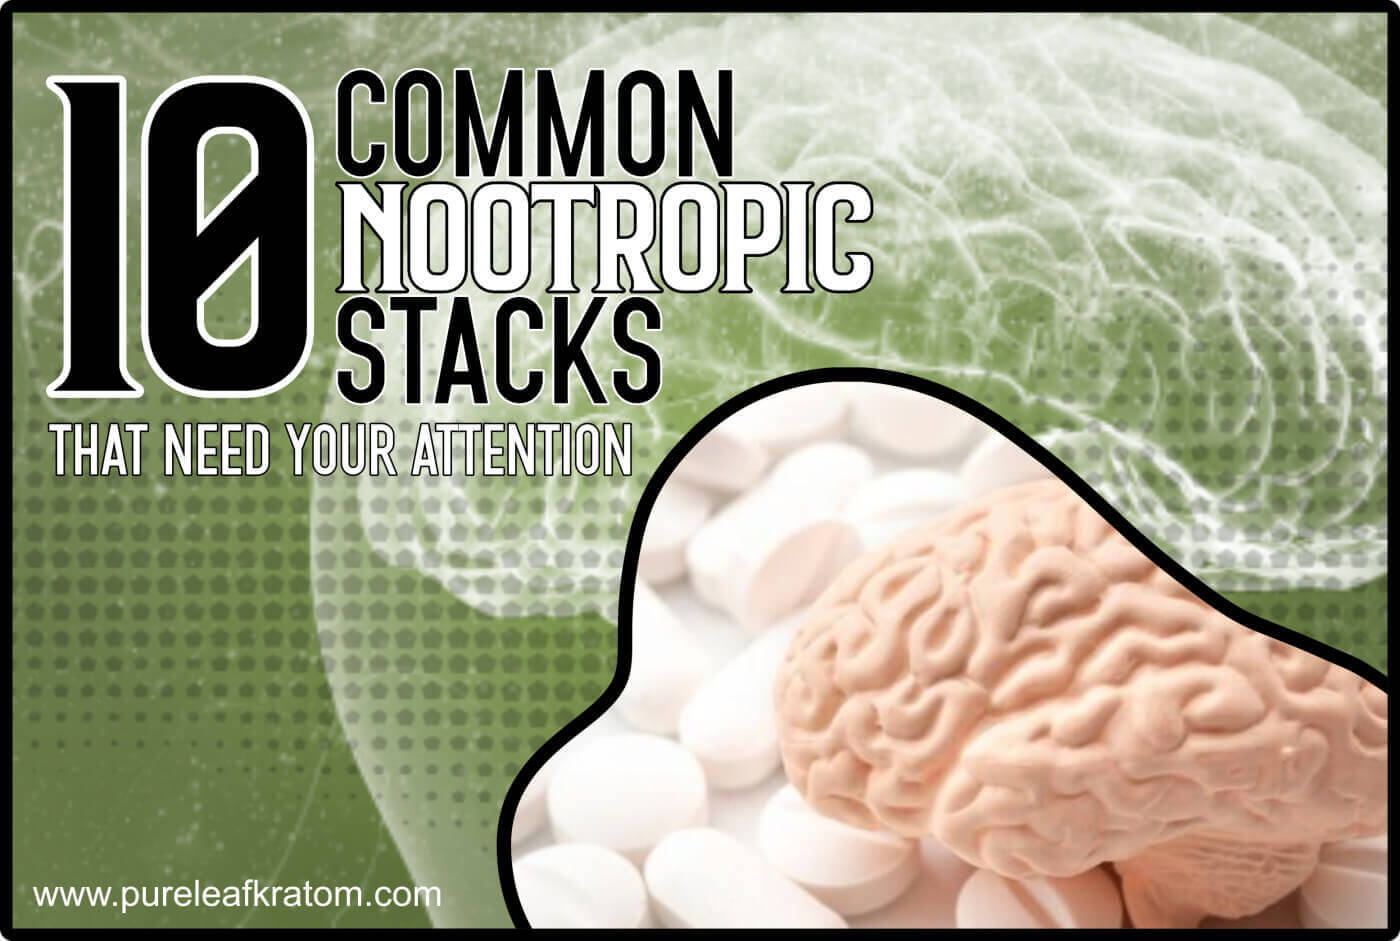 10 Common Nootropics Stacks That Need Your Attention